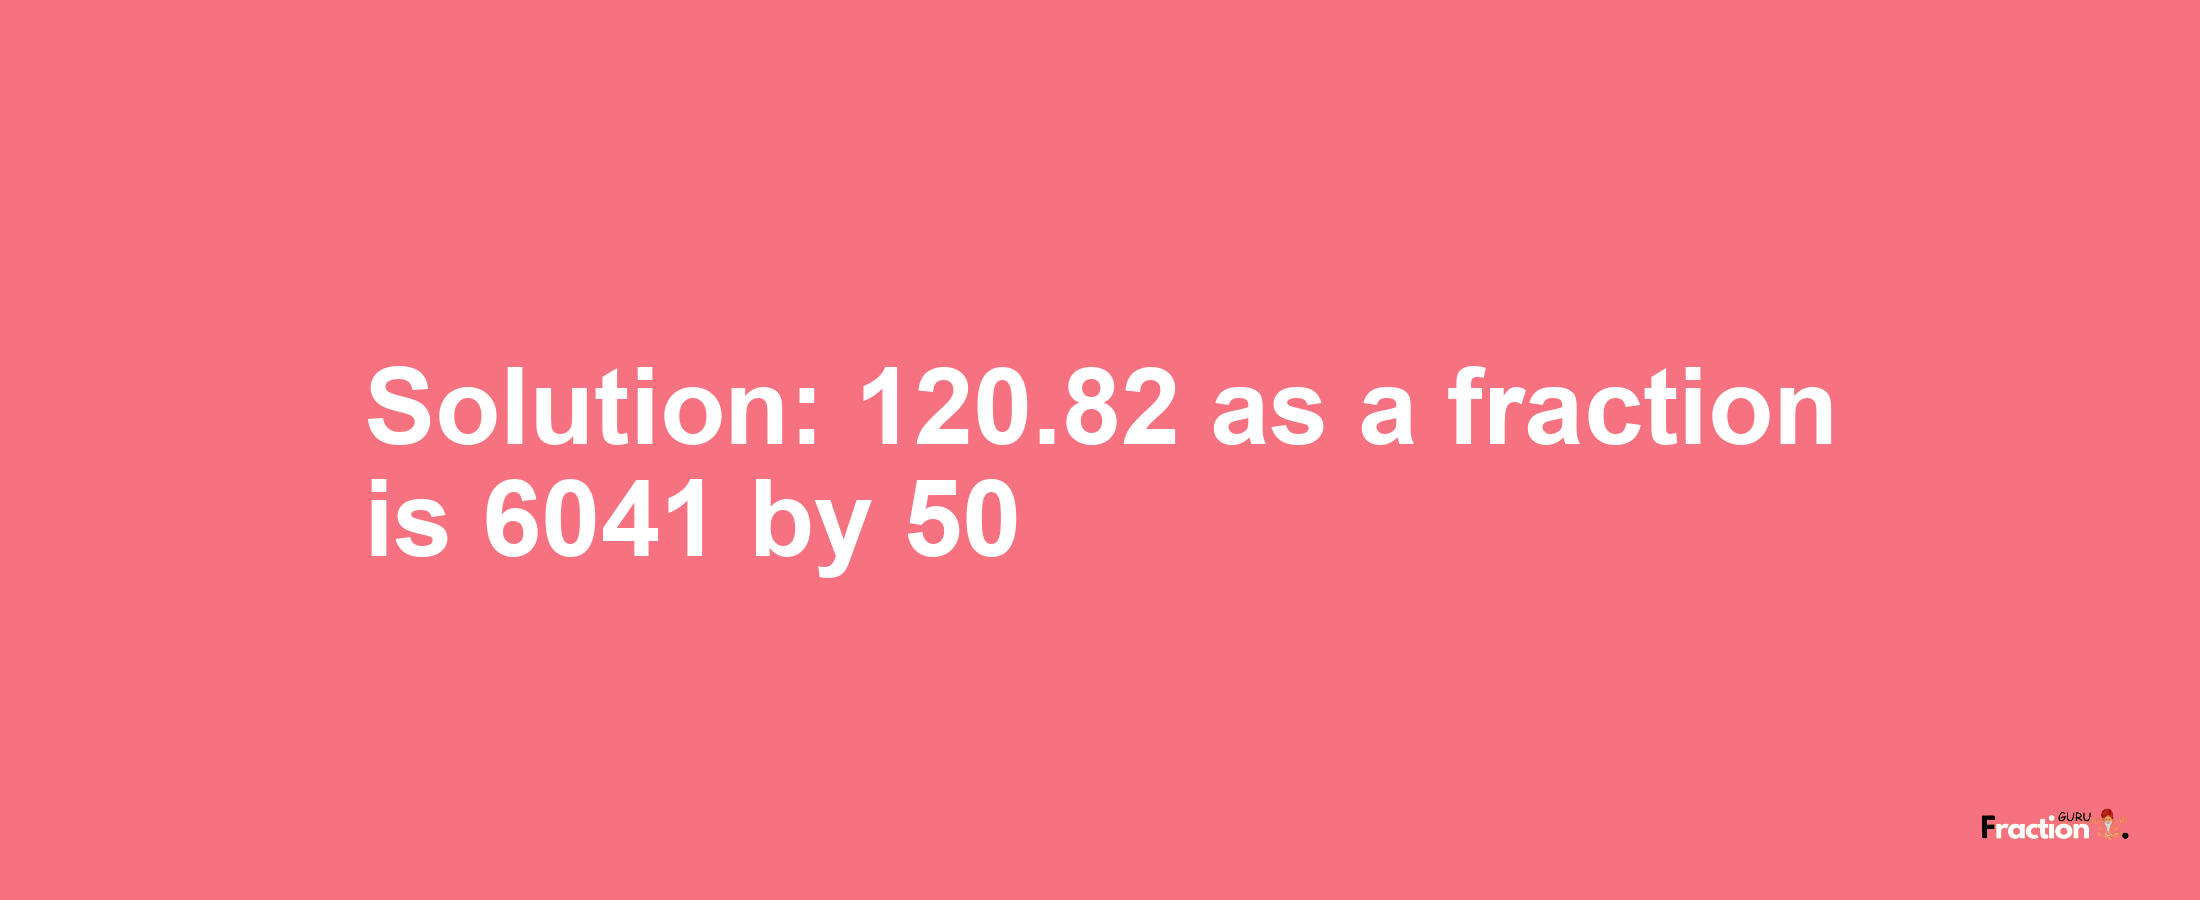 Solution:120.82 as a fraction is 6041/50